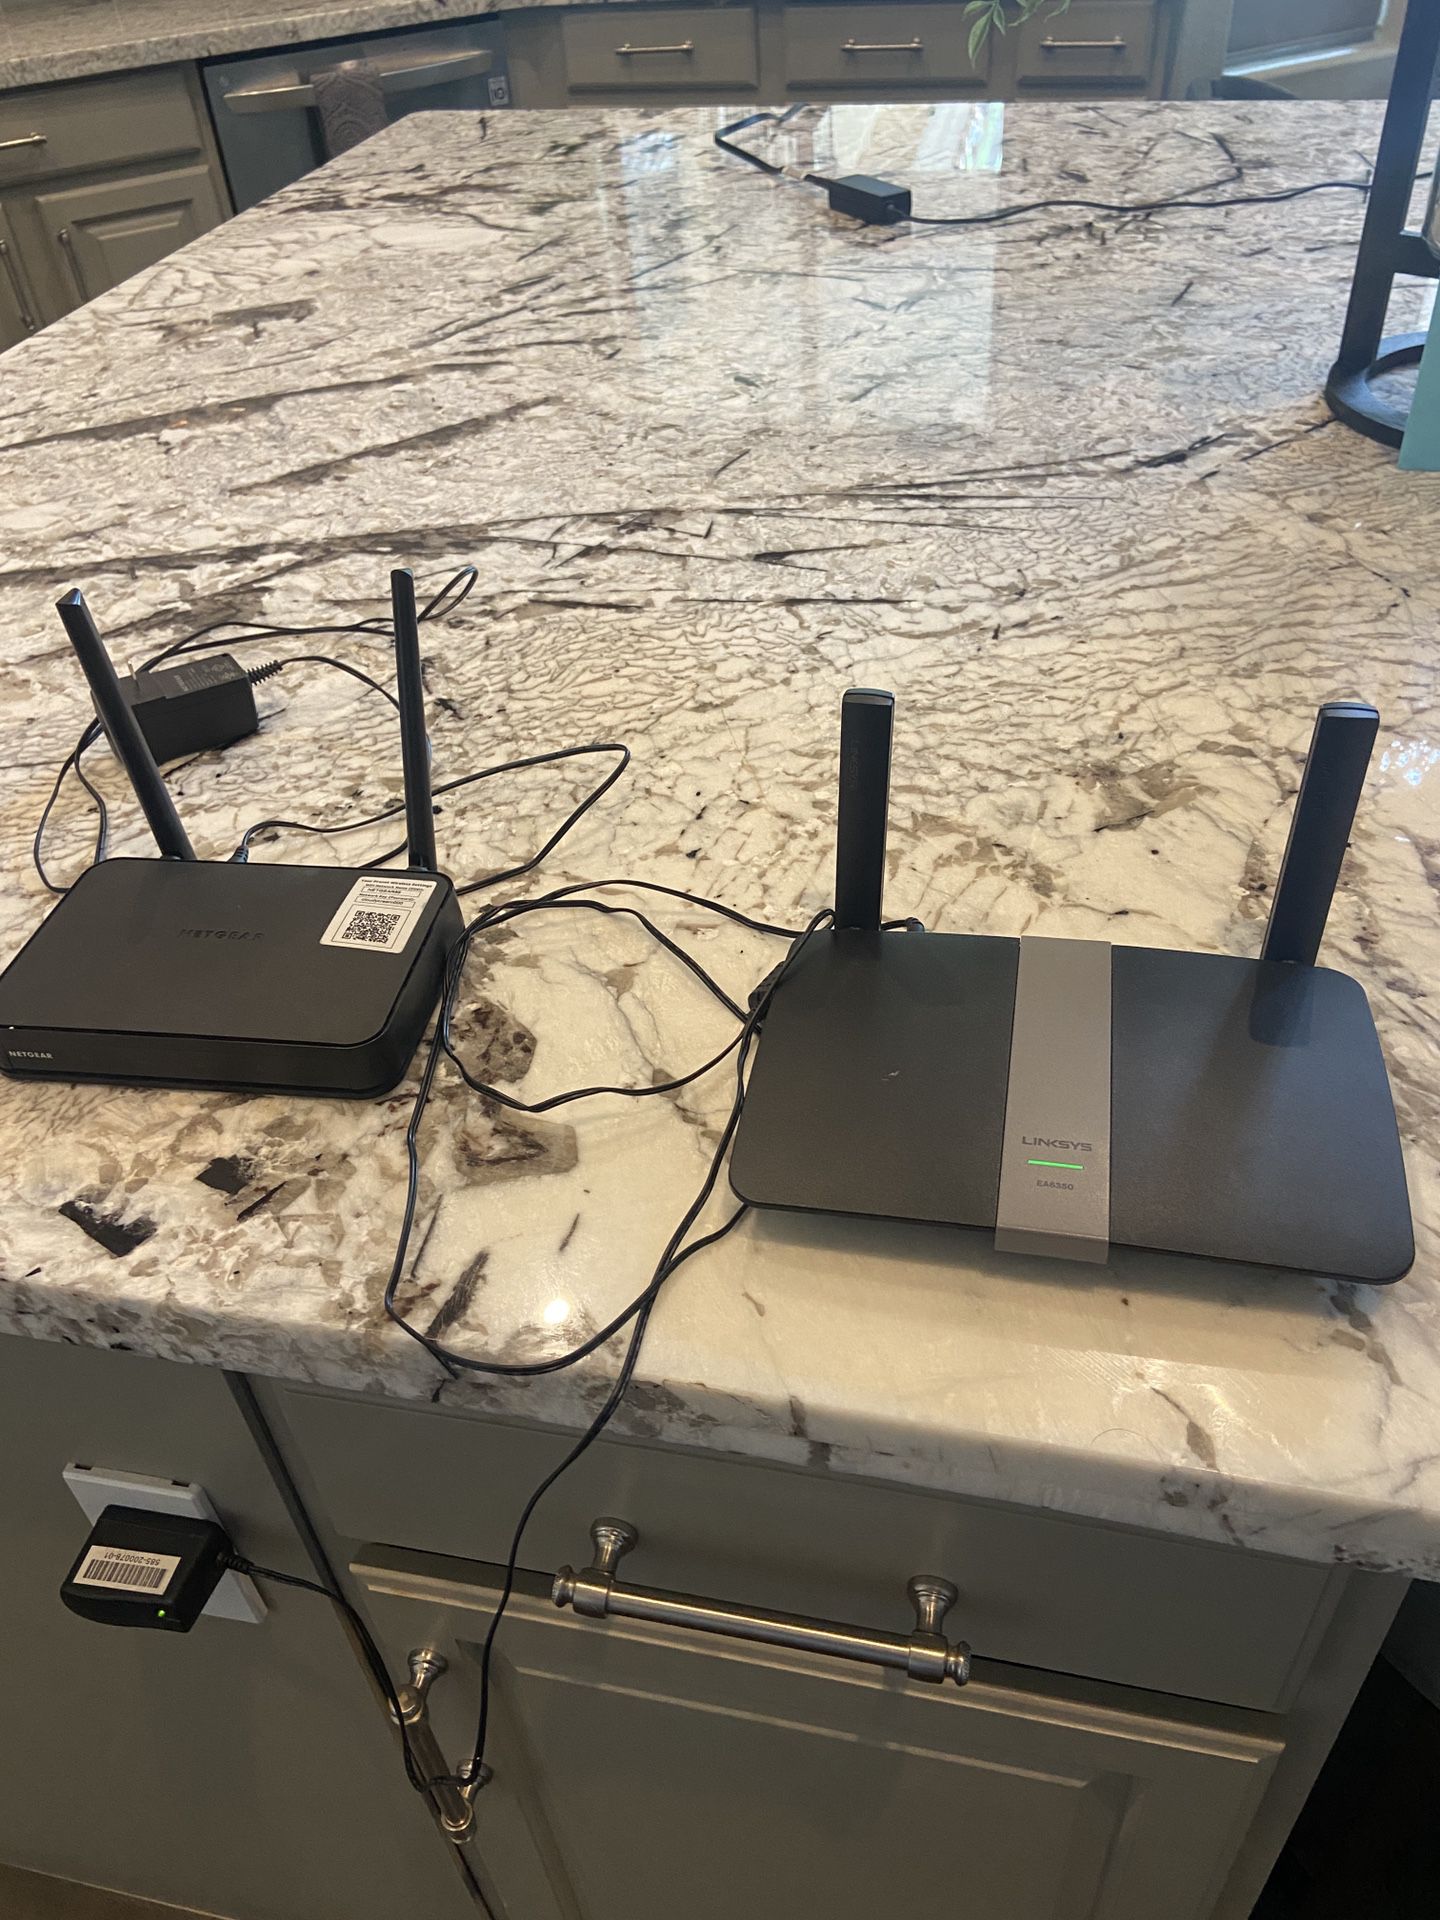 2 Wifi Routers Linksys and Netgear